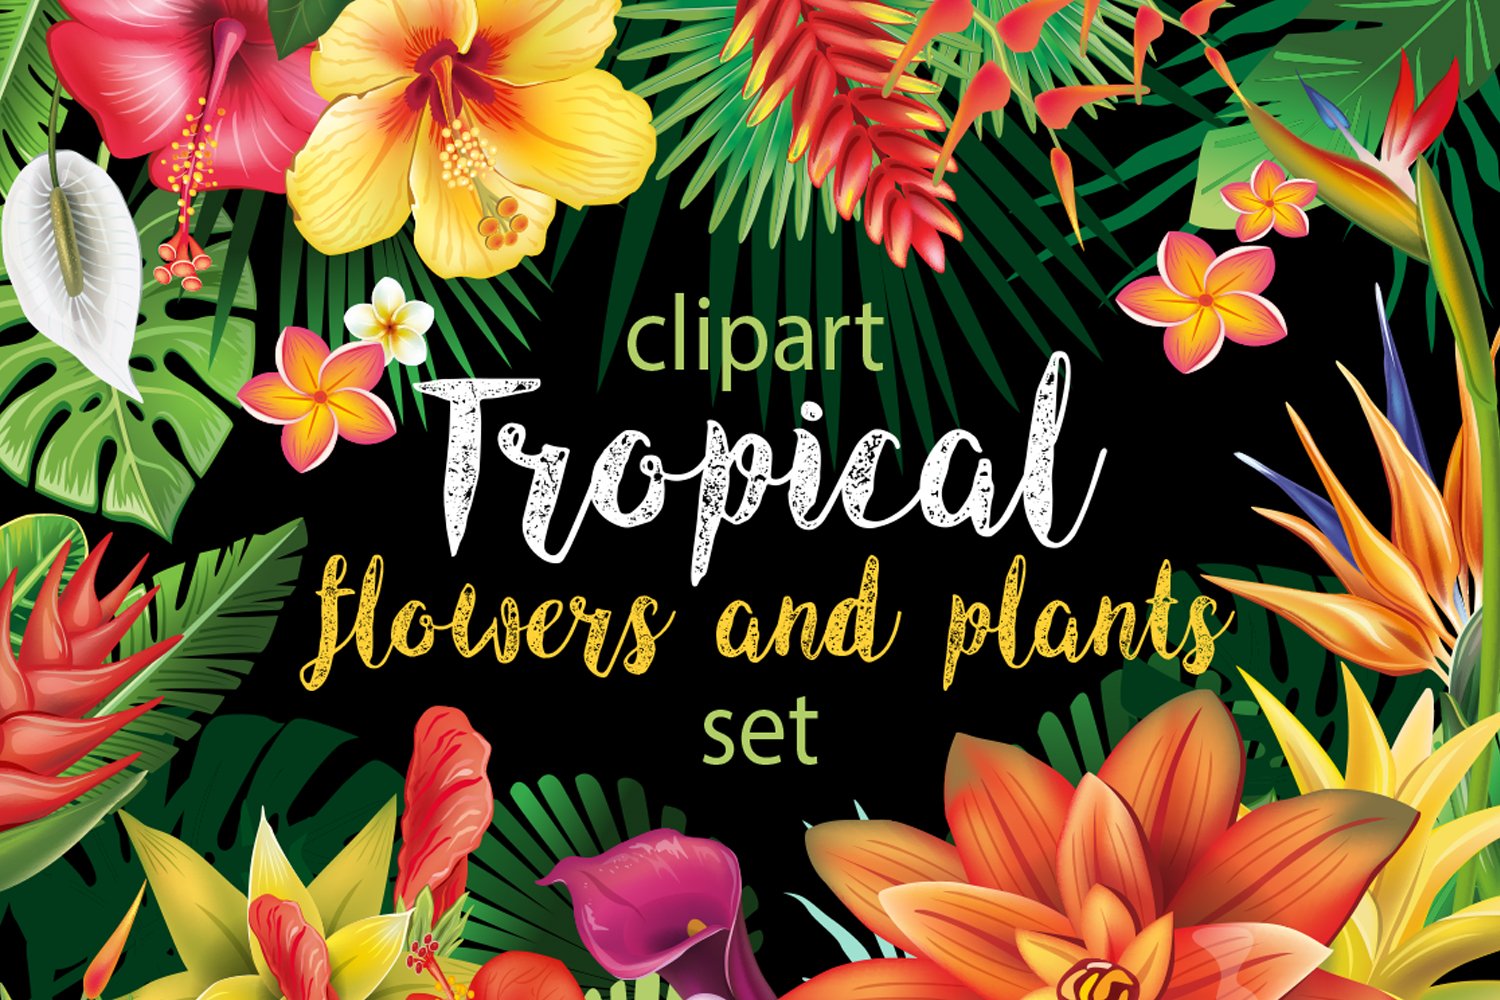 Dark background with colorful tropical flowers.